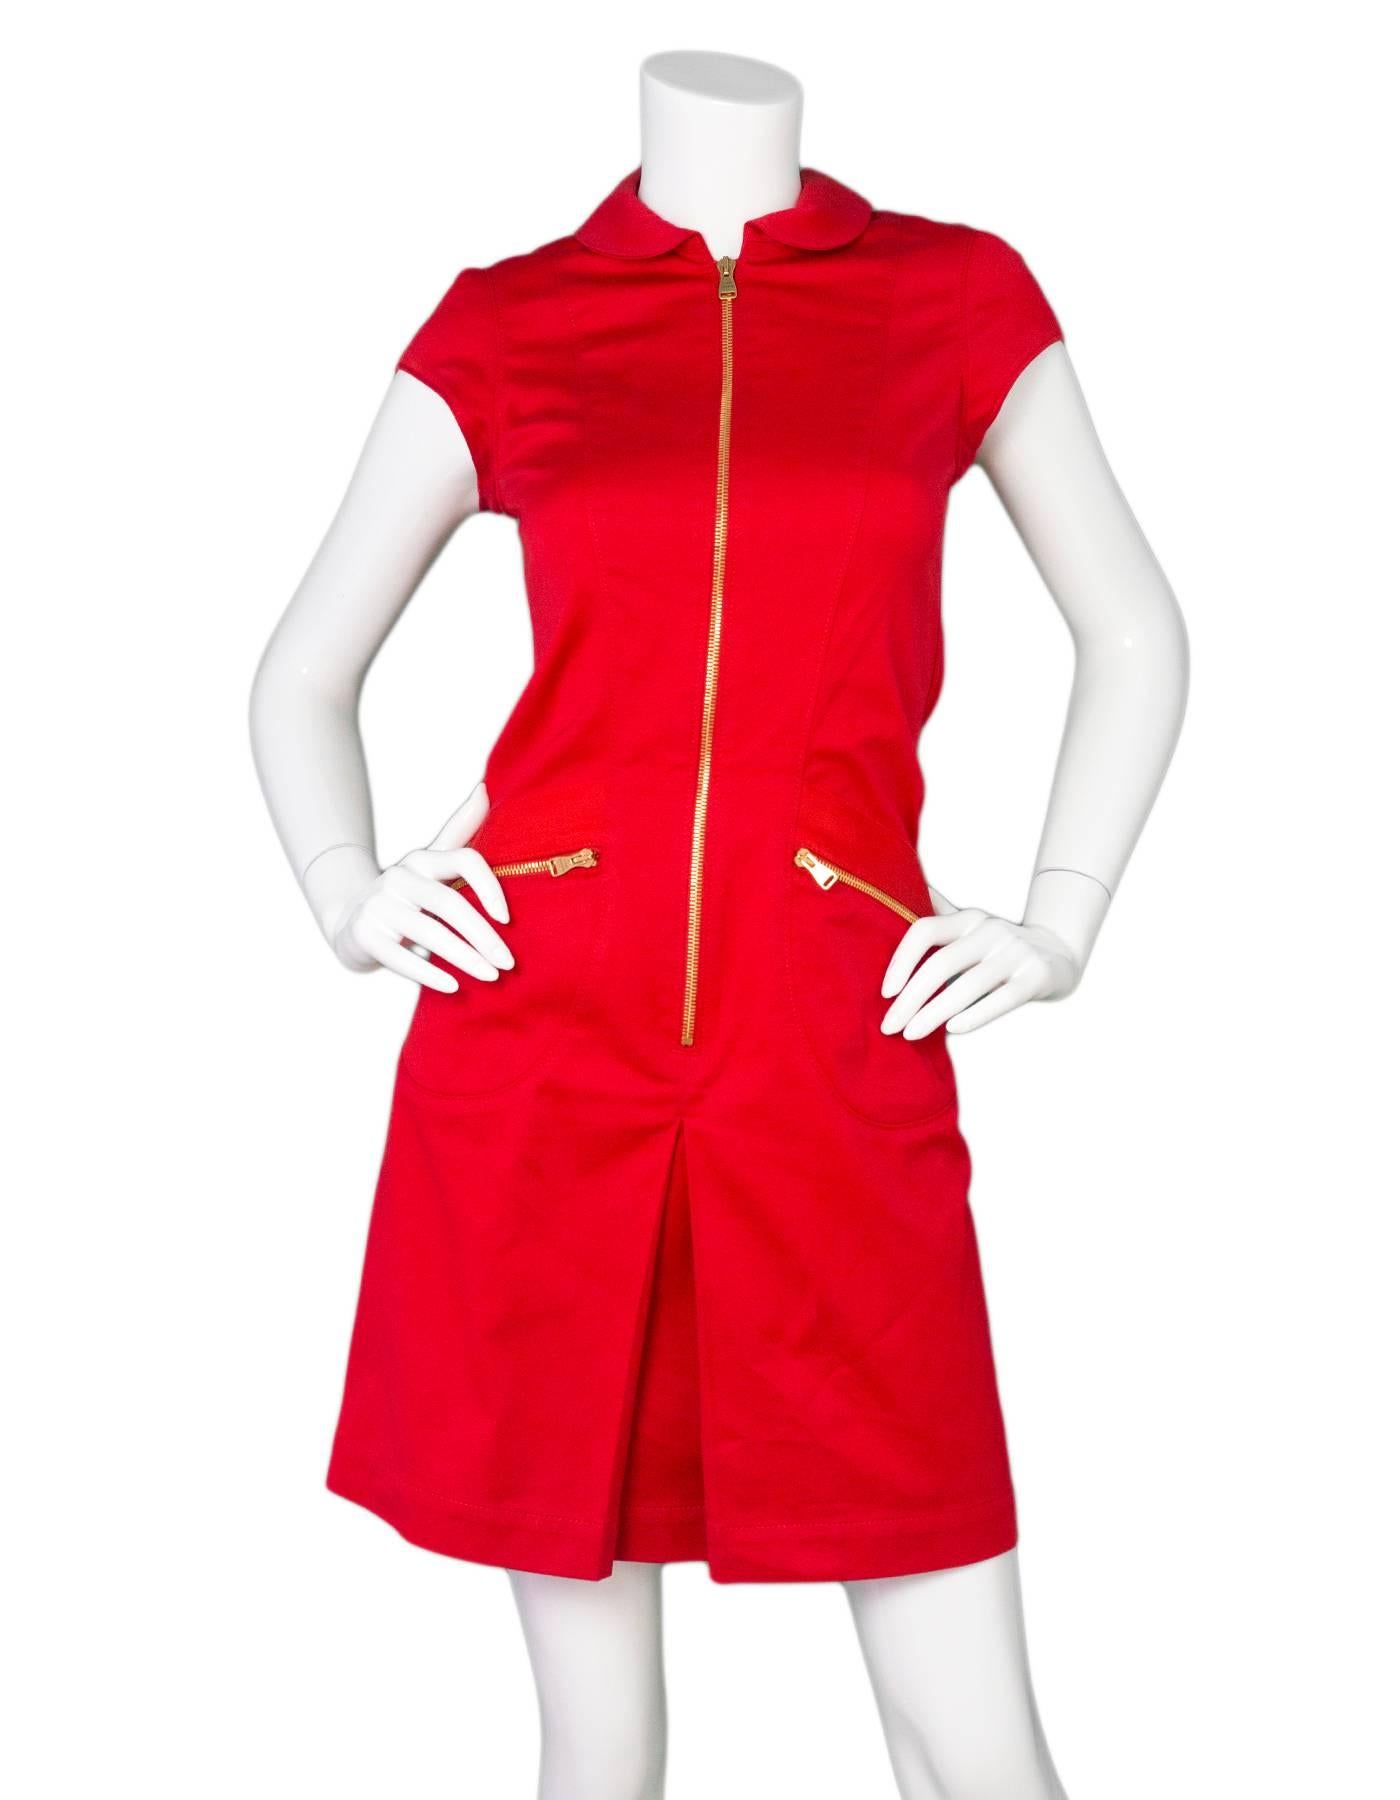 Louis Vuitton Red Cap Sleeve Zipper Dress Sz IT36

Made In: Italy
Color: Red
Composition: 98% cotton, 2% elastane
Lining: Purple and black, 61% acetate, 39% rayon
Closure/Opening: Front zip closure
Exterior Pockets: Side zip pockets
Interior